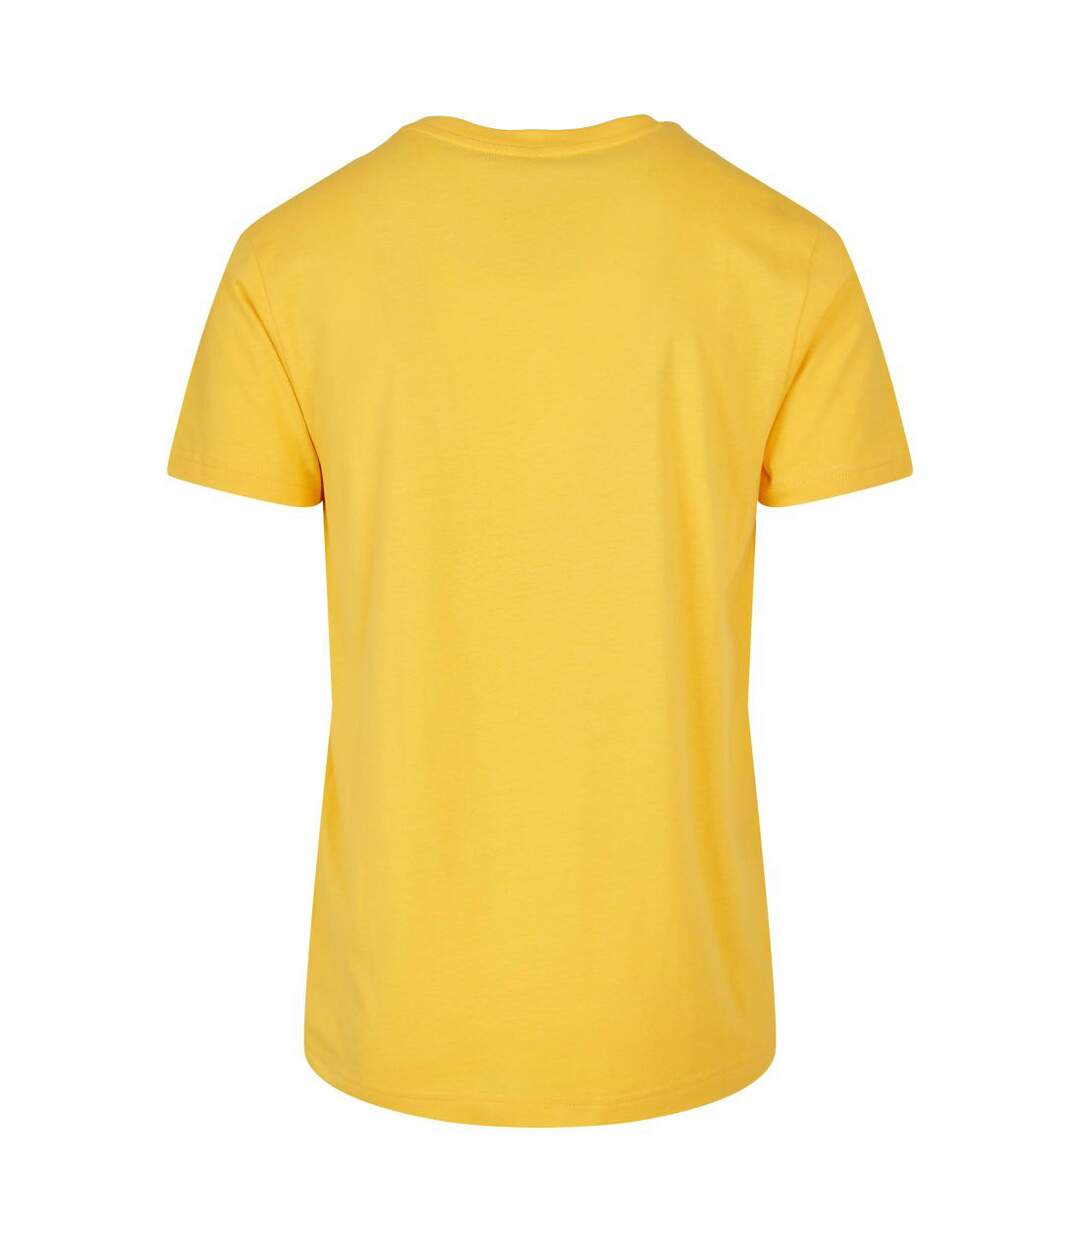 Build Your Brand Mens Basic Round Neck T-Shirt (Taxi Yellow)